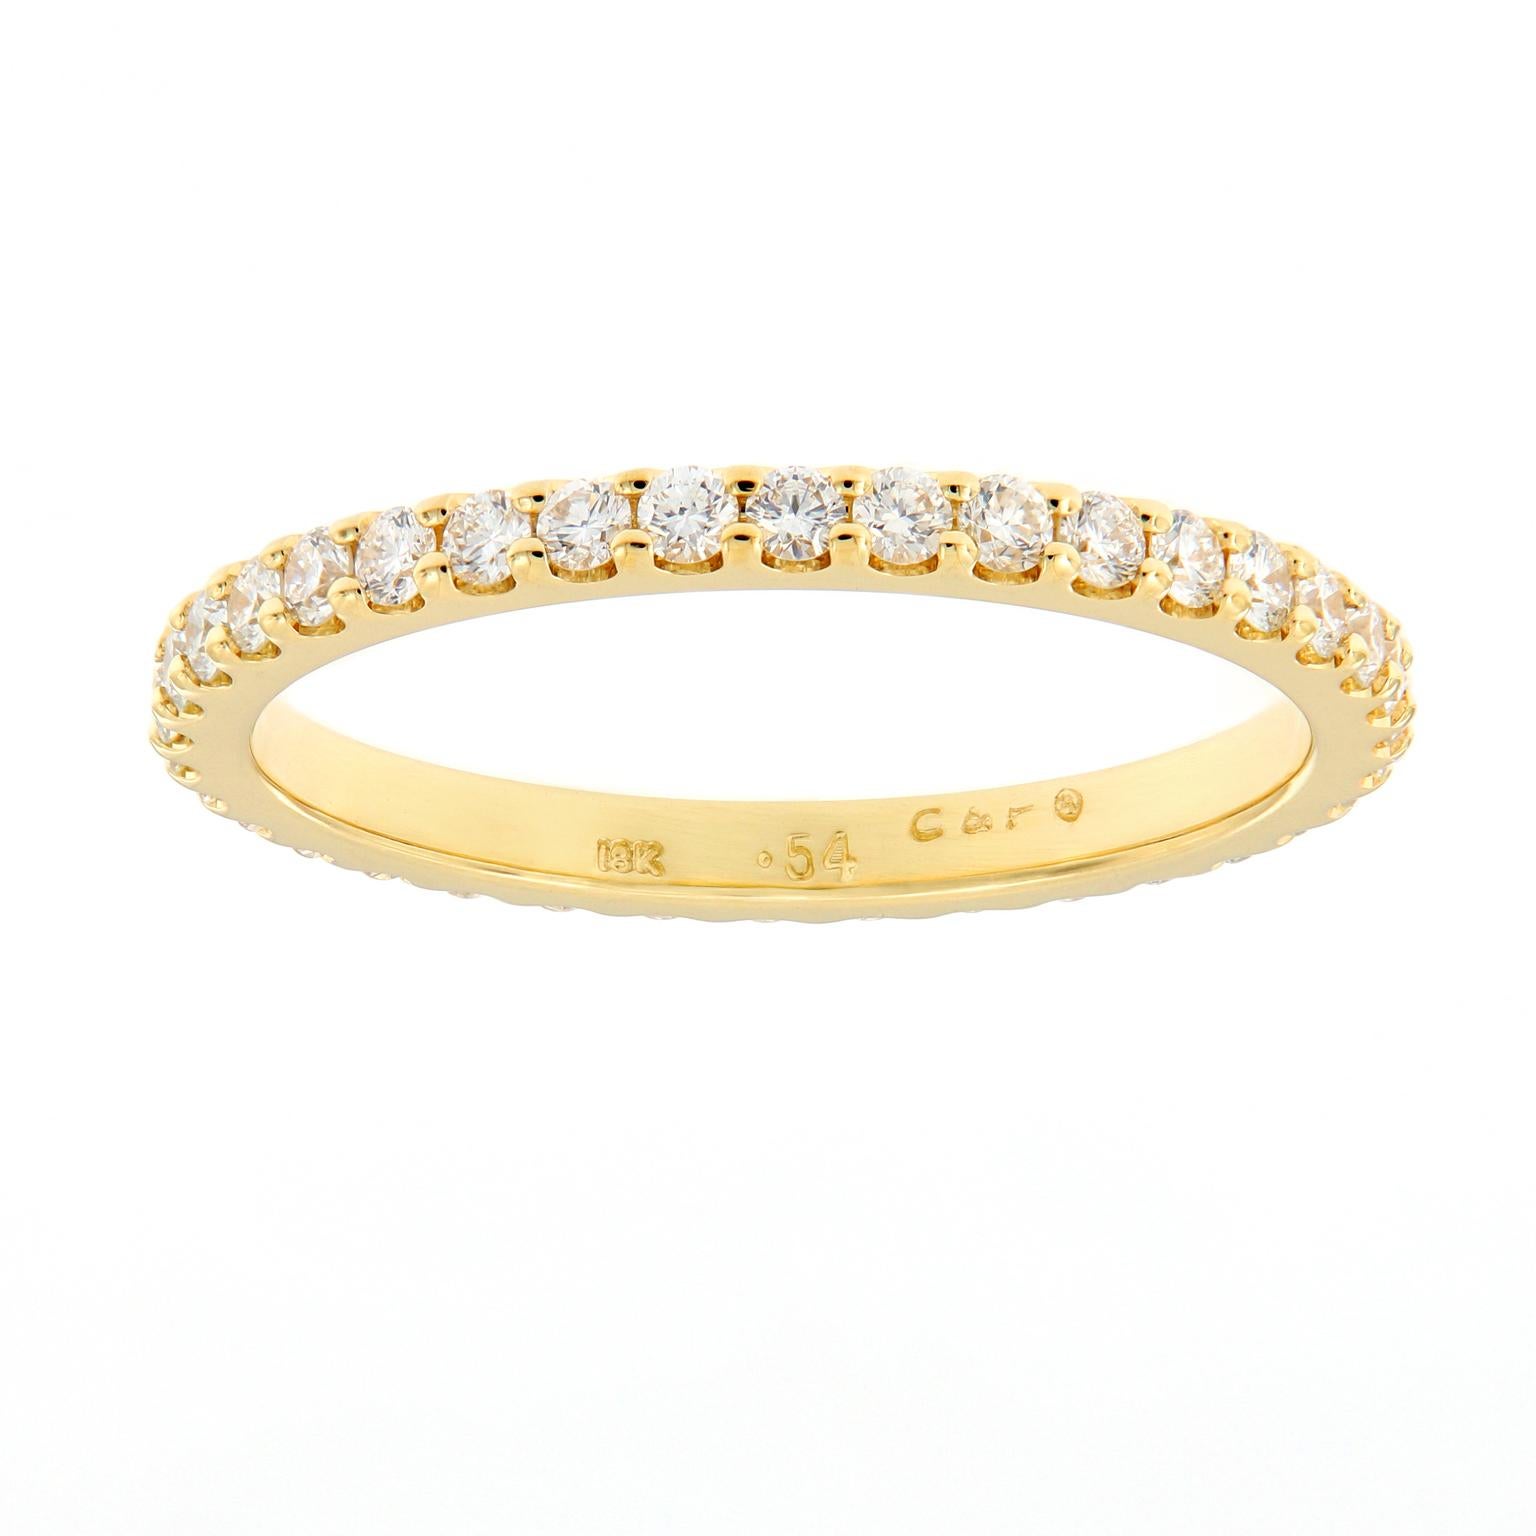 Ring is crafted in 18k yellow gold and is great for stacking and would also beautifully complement an engagement ring. Weighs 1.8 grams. Ring Size 6.

Diamonds 0.54 cttw